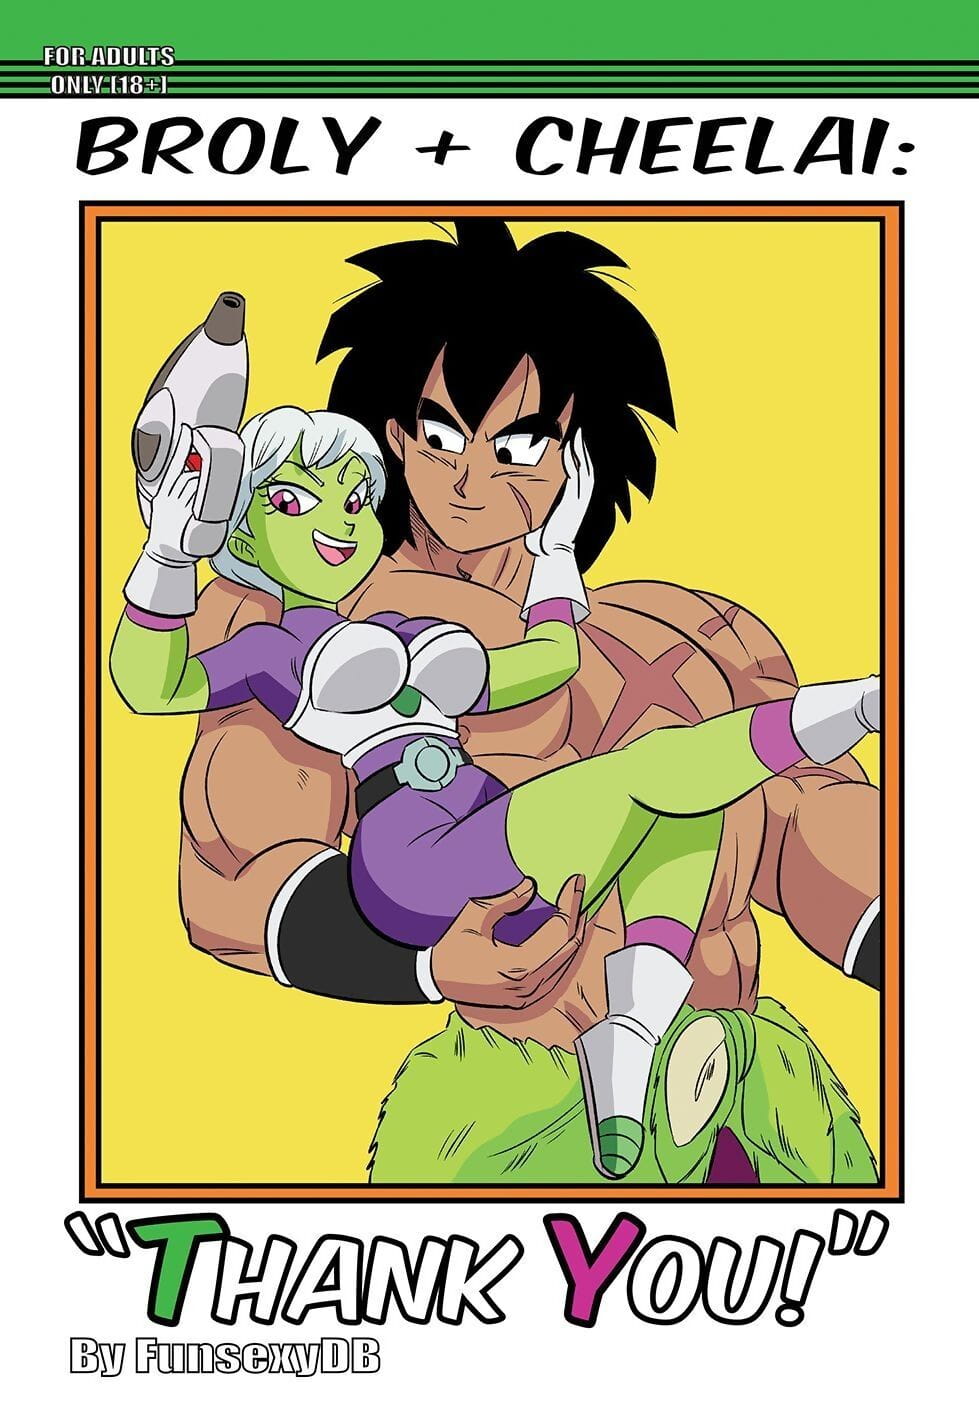 Broly x Cheelai: Thanks be given to You!